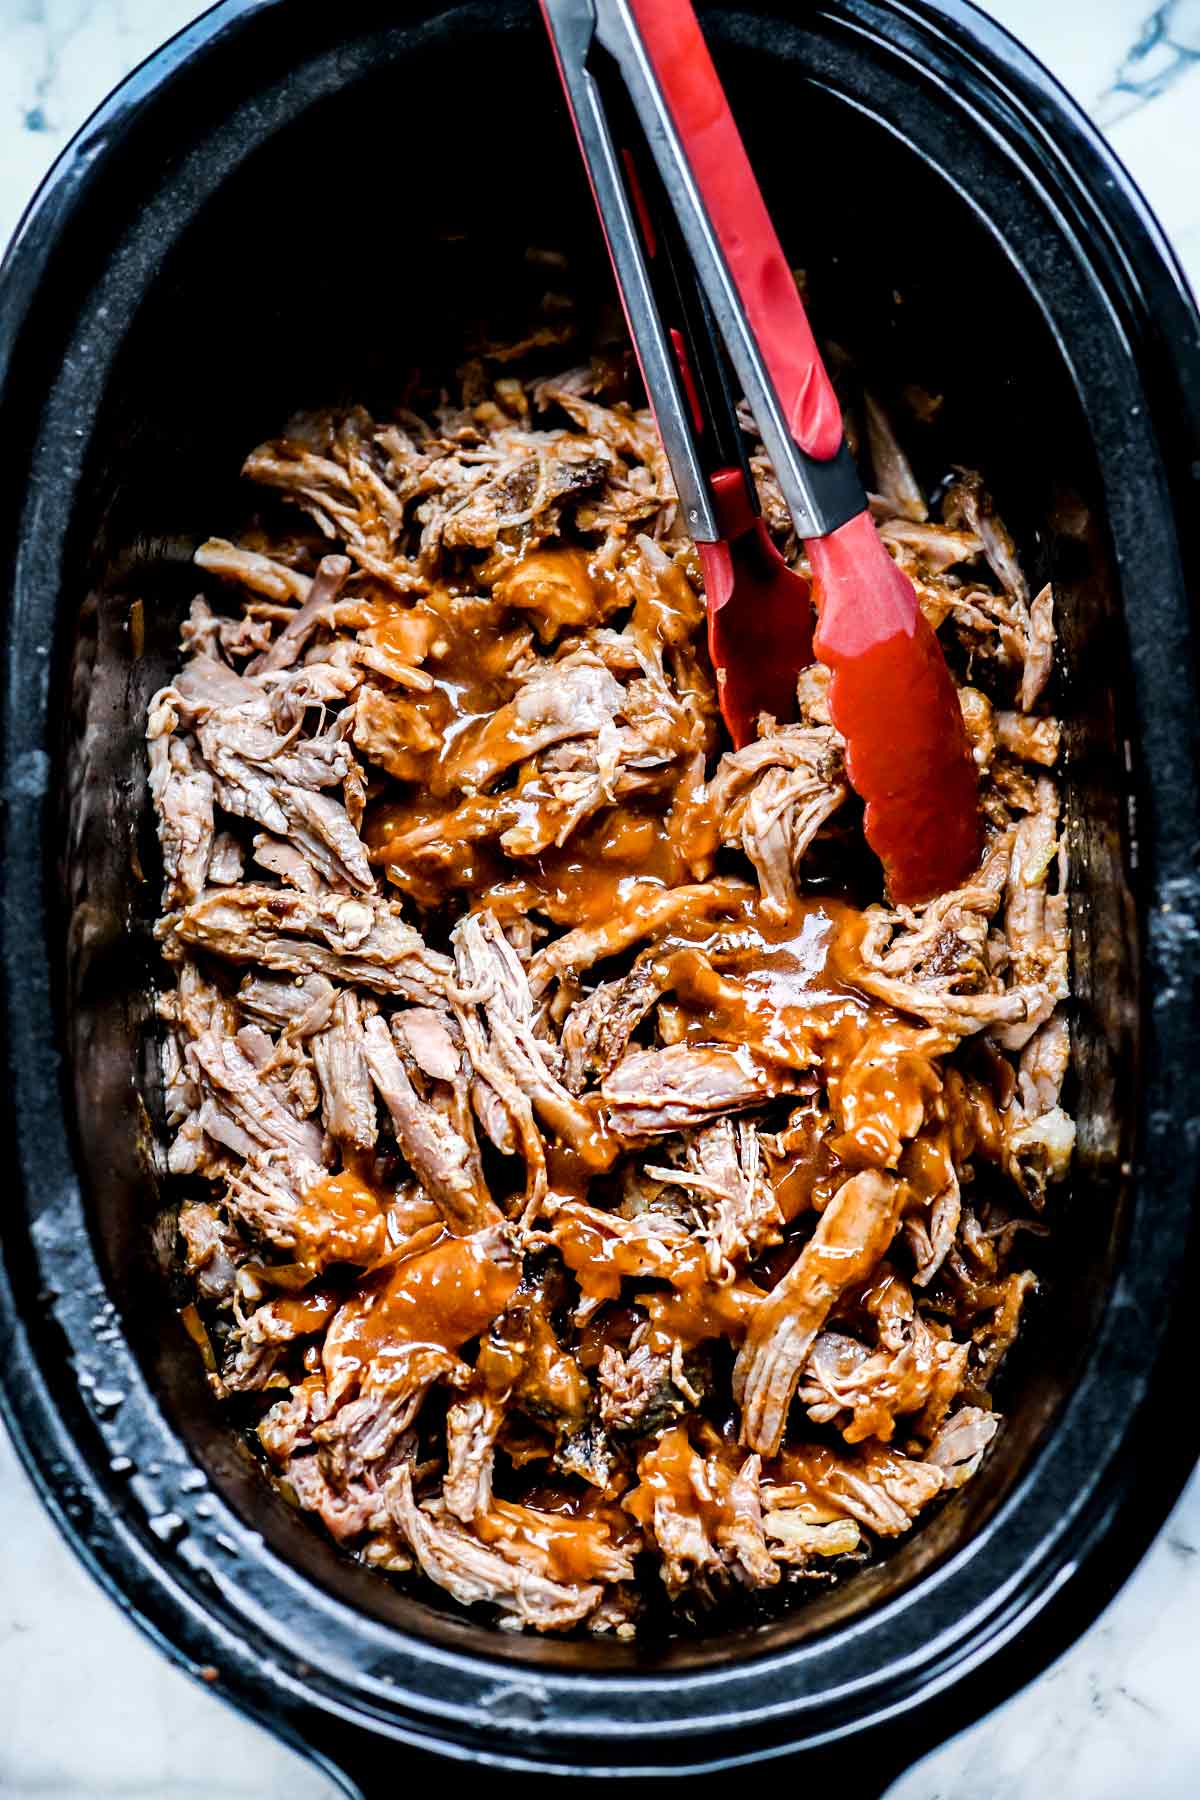 Easy Slow Cooker Pulled Pork Recipe - foodiecrush .com